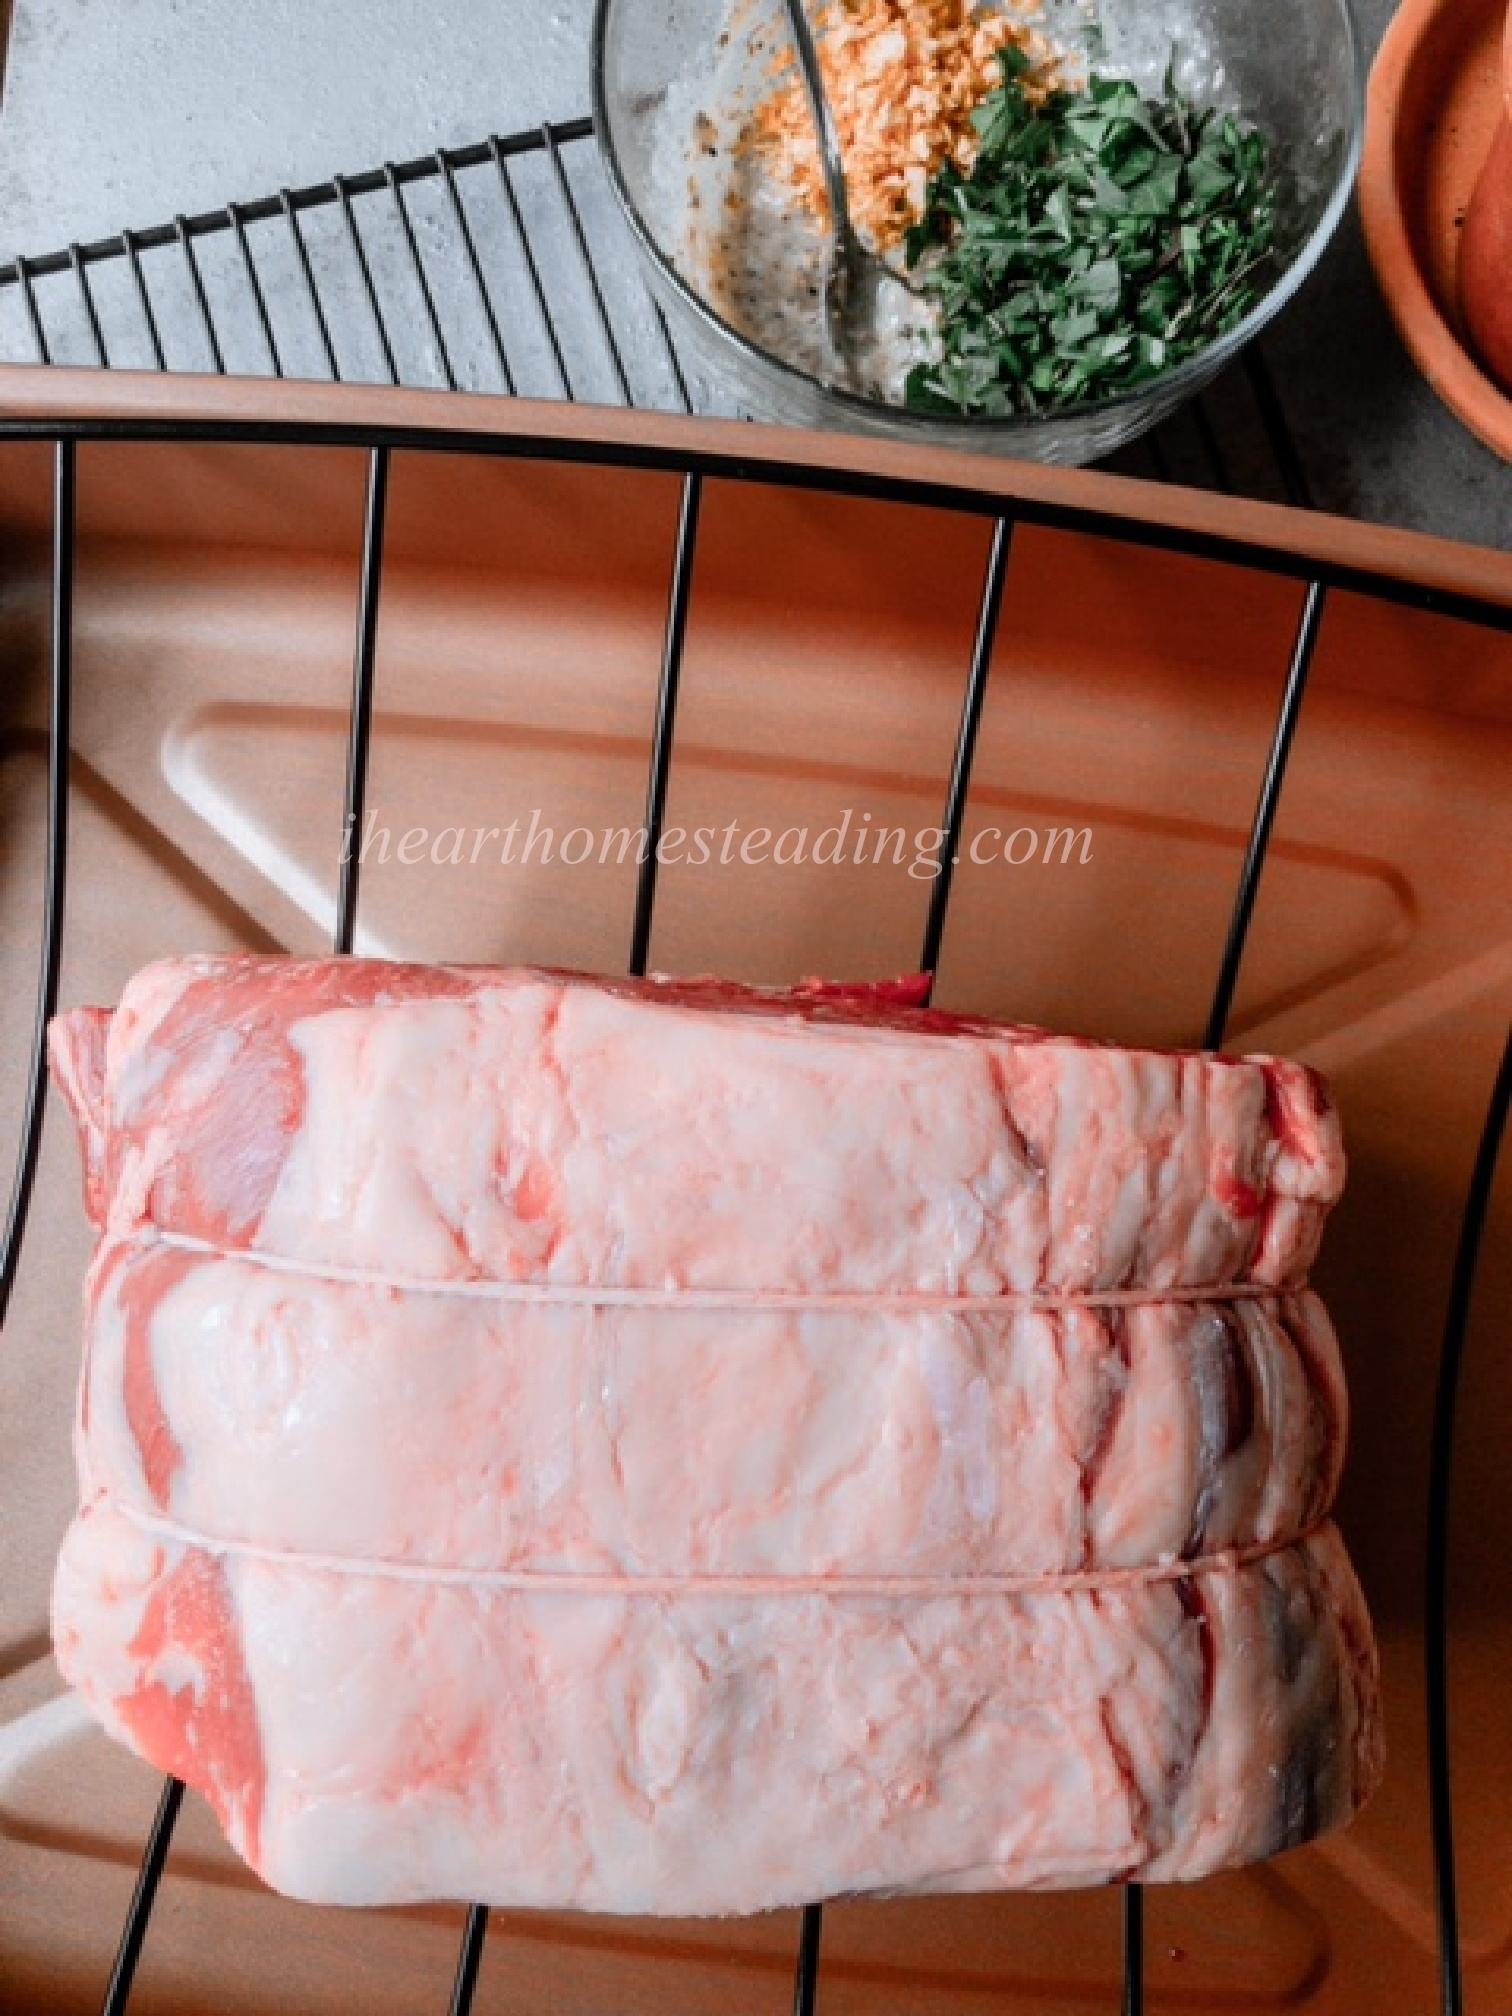 https://www.firsthomelovelife.com/wp-content/uploads/2020/11/how-to-make-prime-rib-1.jpg